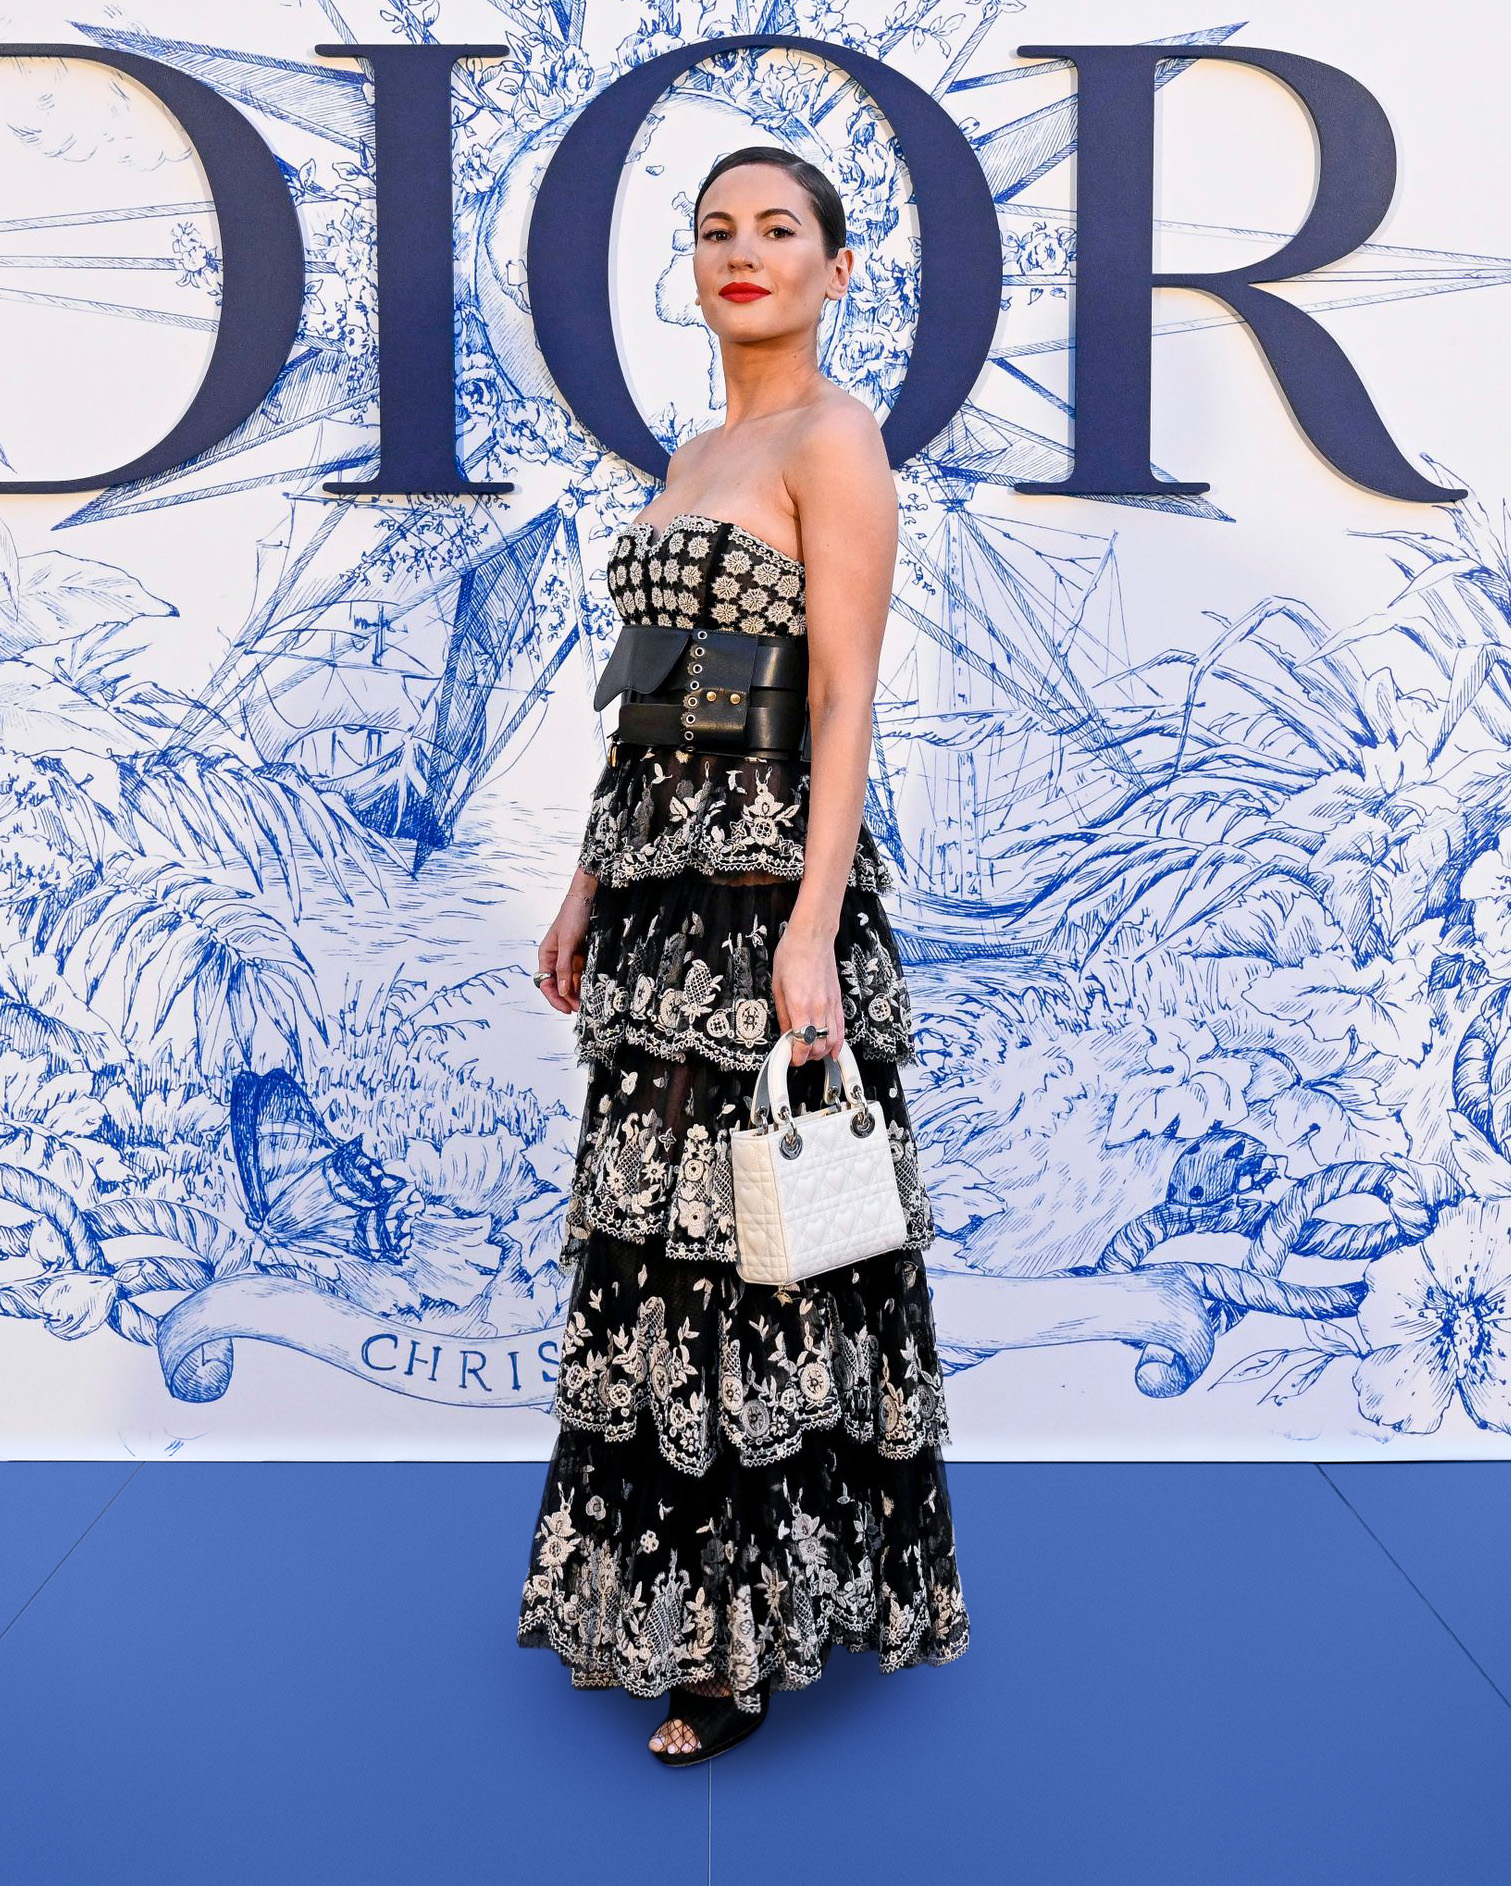 SEVILLE, SPAIN - JUNE 16: Ivana Baquero attends &quot;Crucero Collection&quot; fashion show presentation by Dior at Plaza de España on June 16, 2022 in Seville, Spain. (Photo by Carlos Alvarez/Getty Images for Dior)